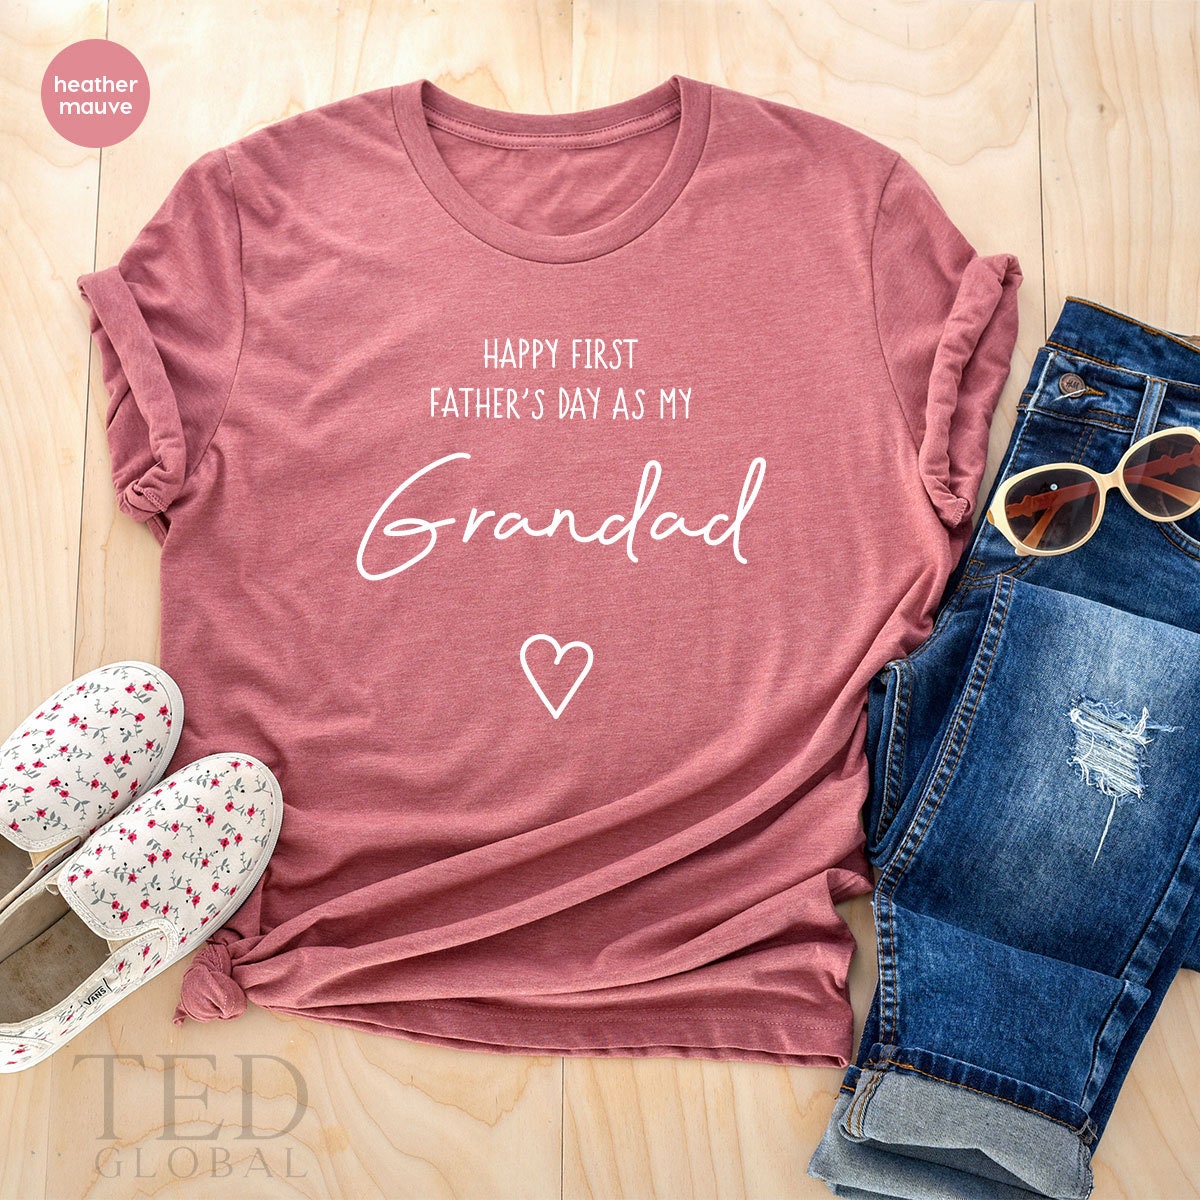 First Fathers Day  Shirt, Grandad Shirt, New Grandpa Shirt, Grandpa Fathers Day Gift, Grandpa To Be Shirt, Baby Announcement For Dad - Fastdeliverytees.com